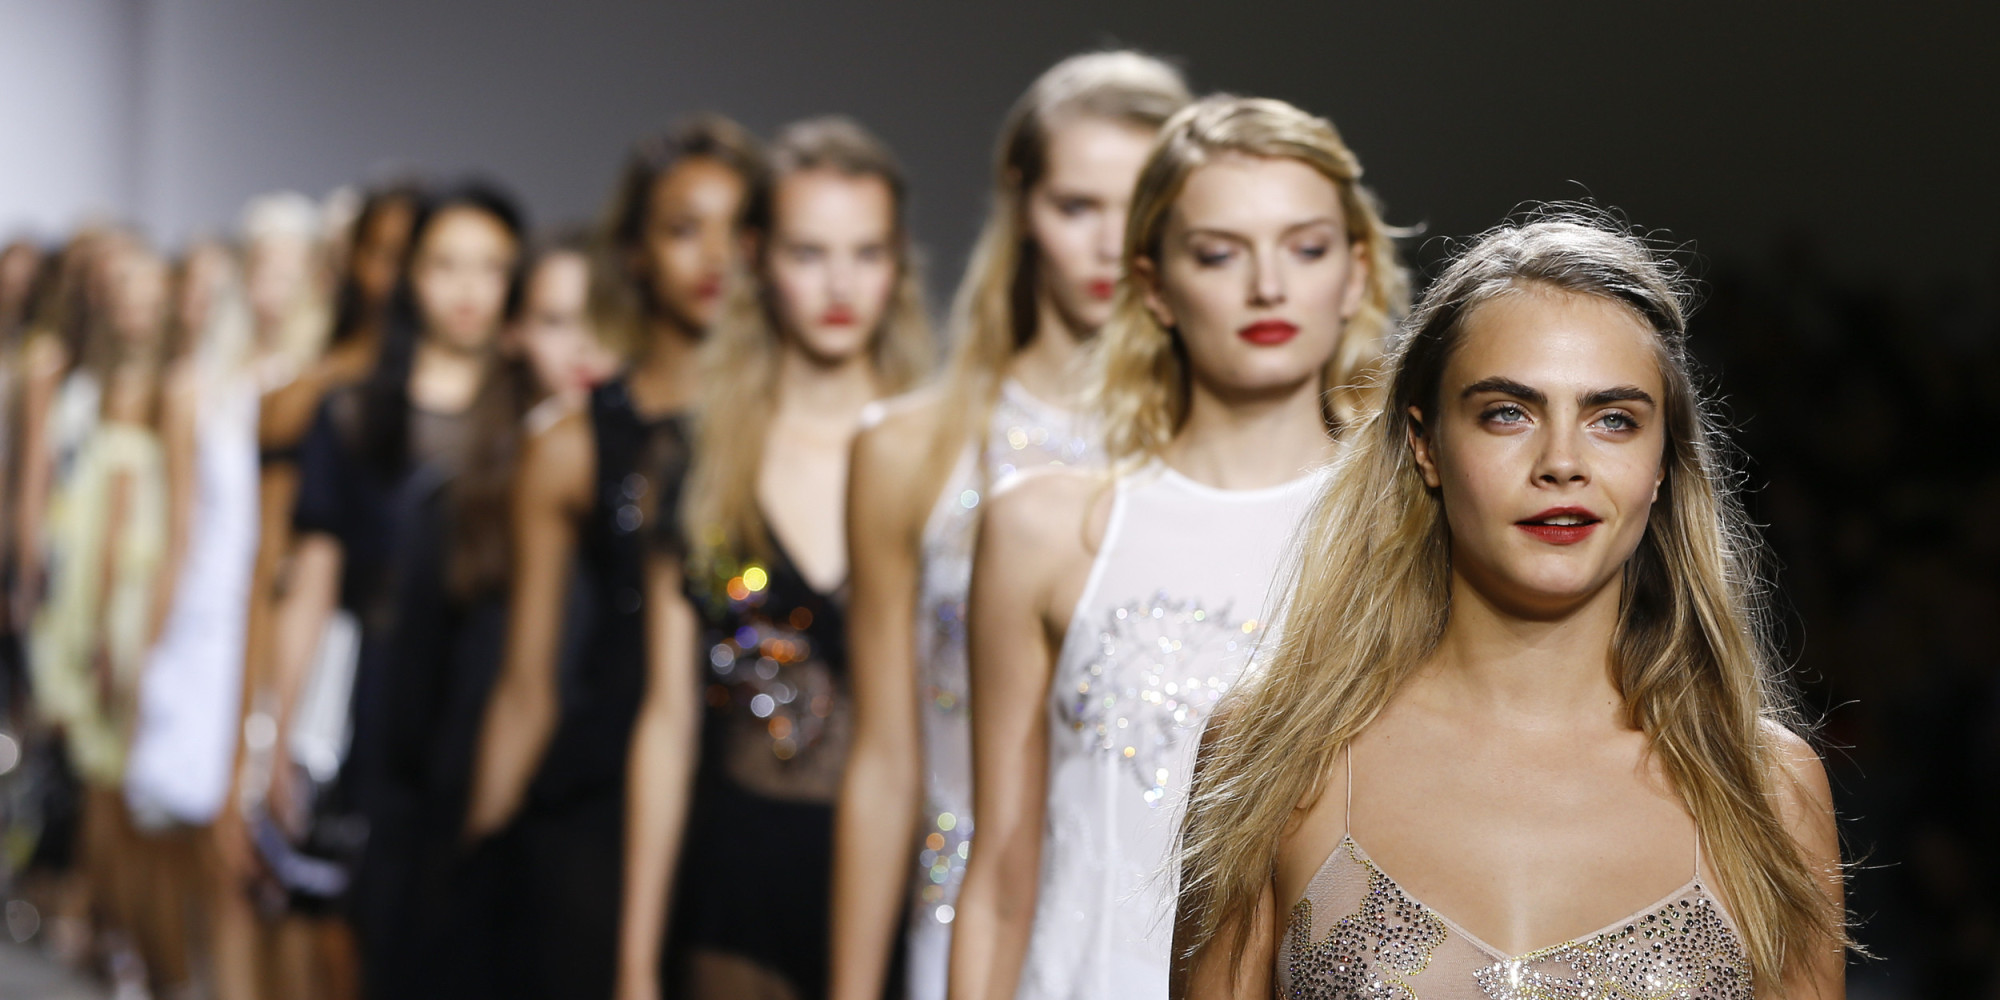 London Fashion Week Schedule September 2015 The Full List And